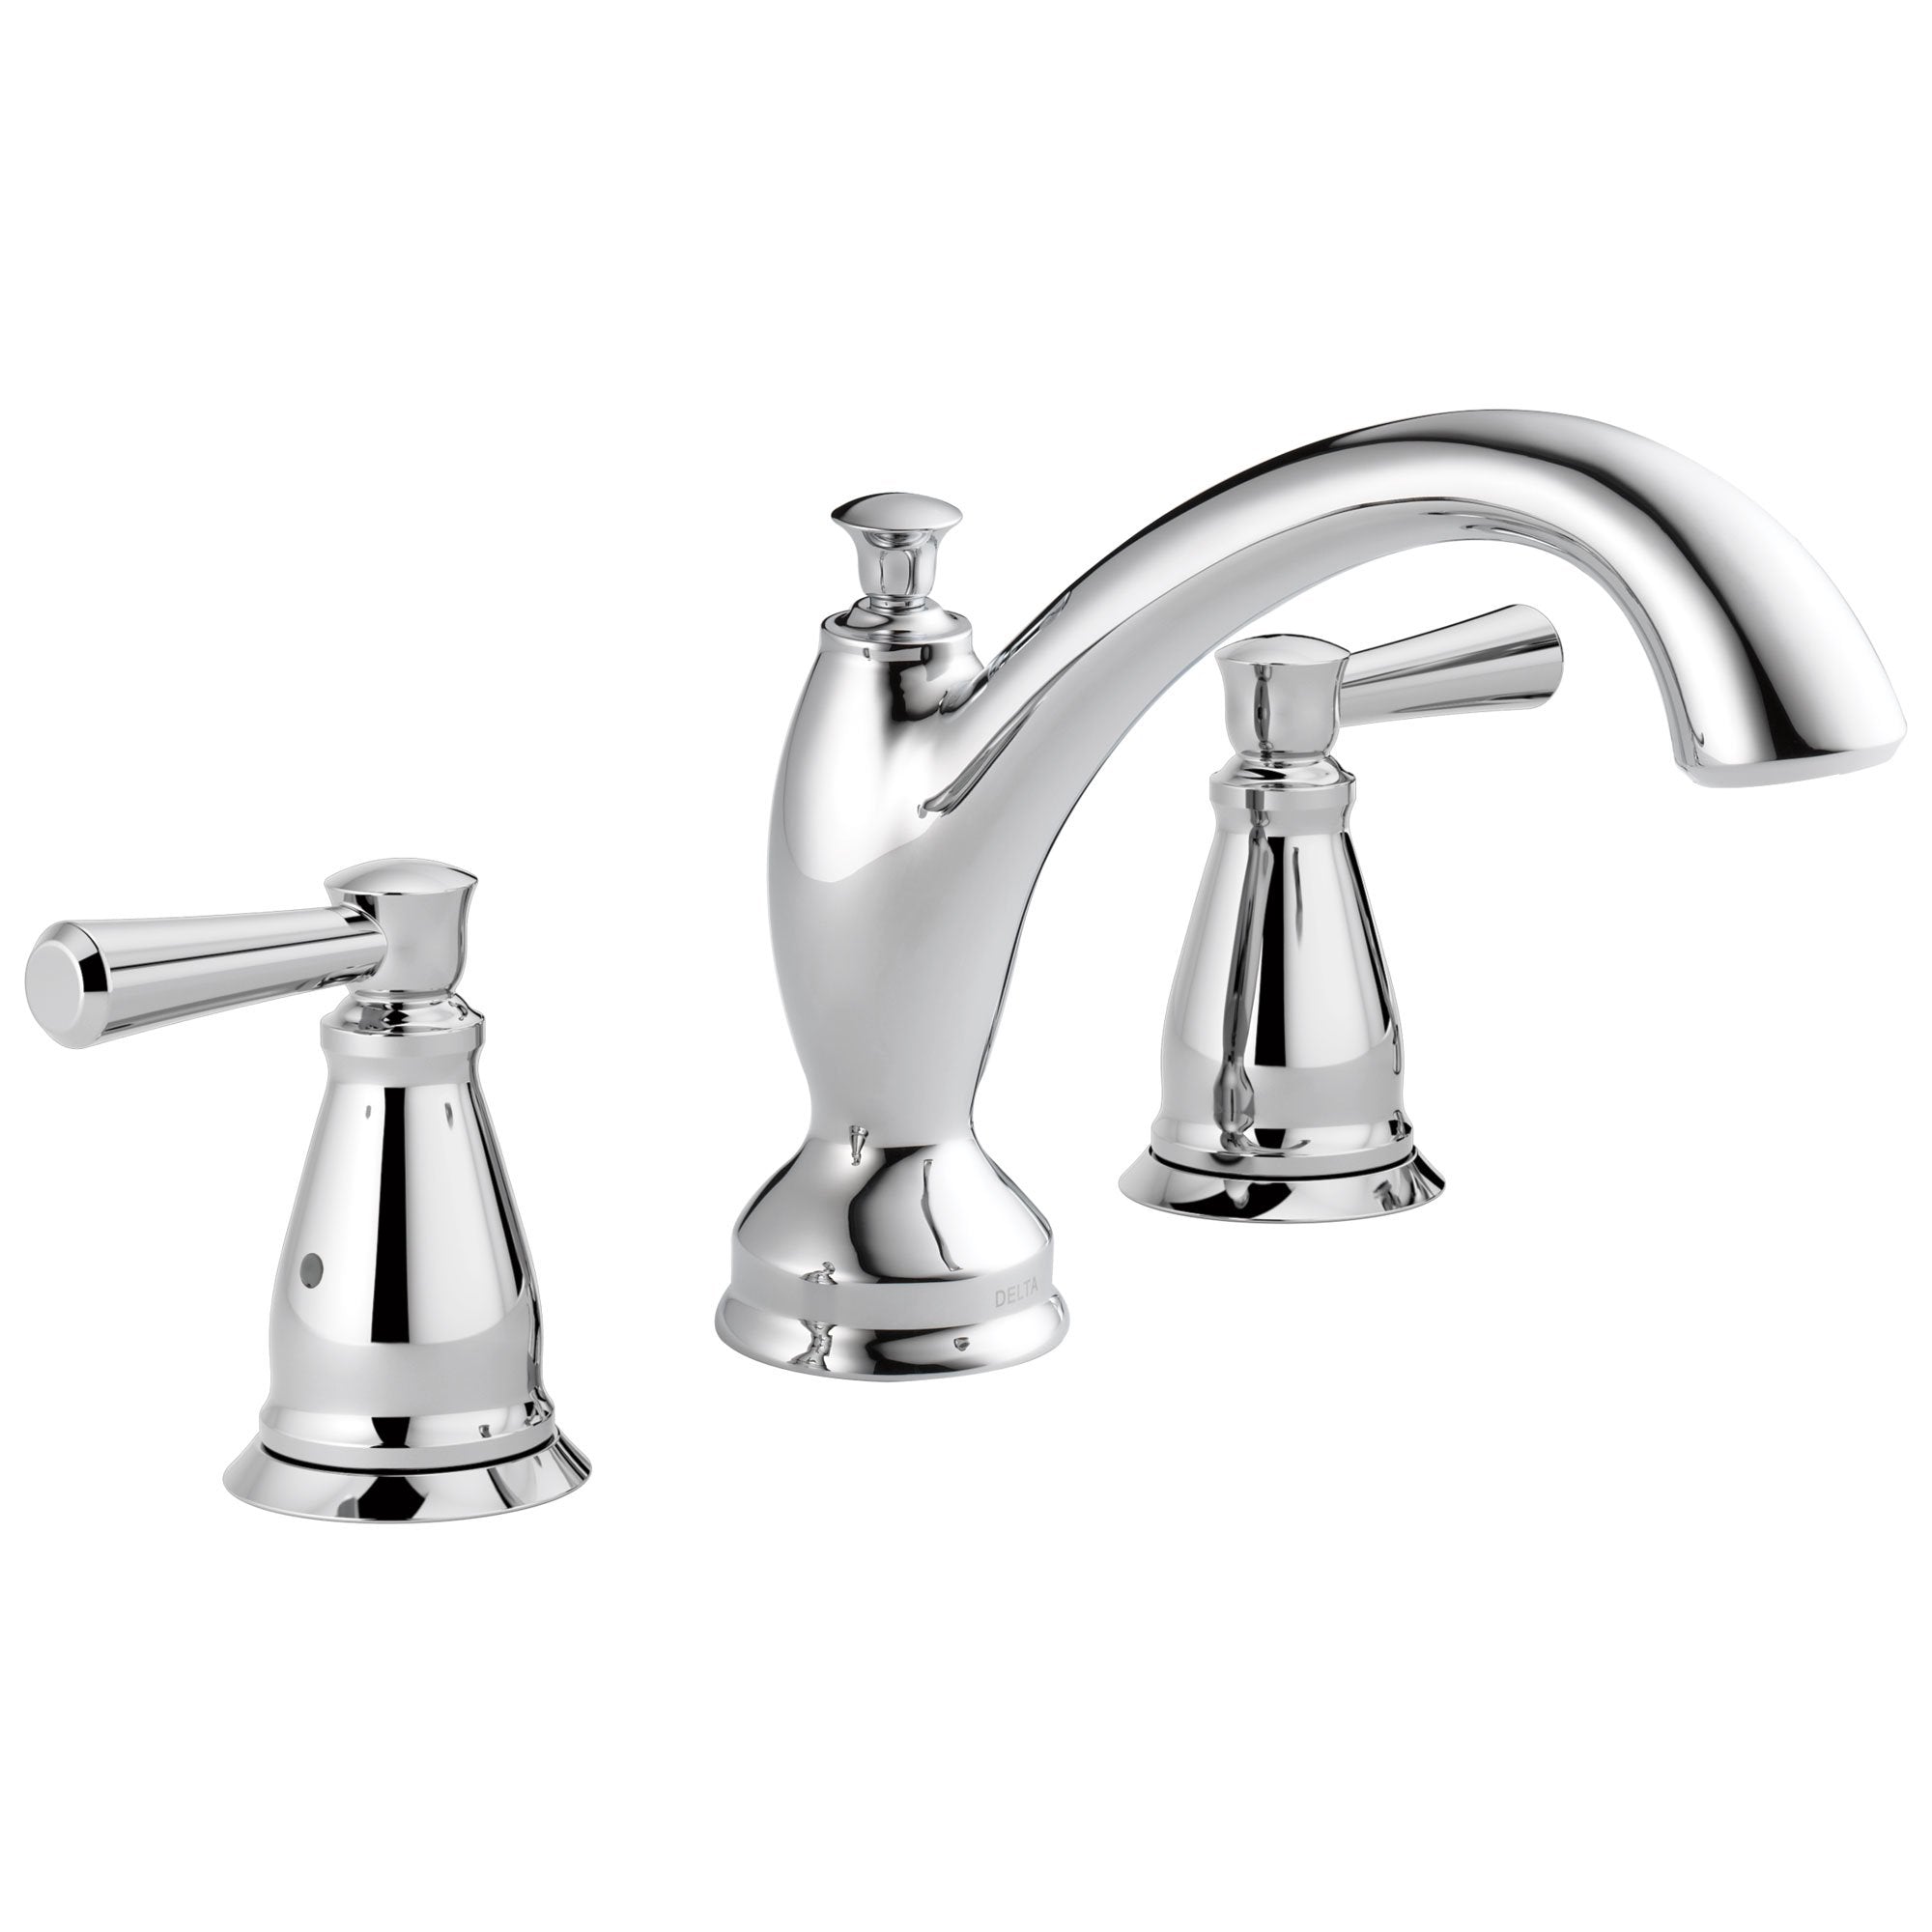 Delta Linden Collection Chrome Finish Widespread Roman Tub Filler Faucet COMPLETE ITEM Includes Rough-in Valve D2162V